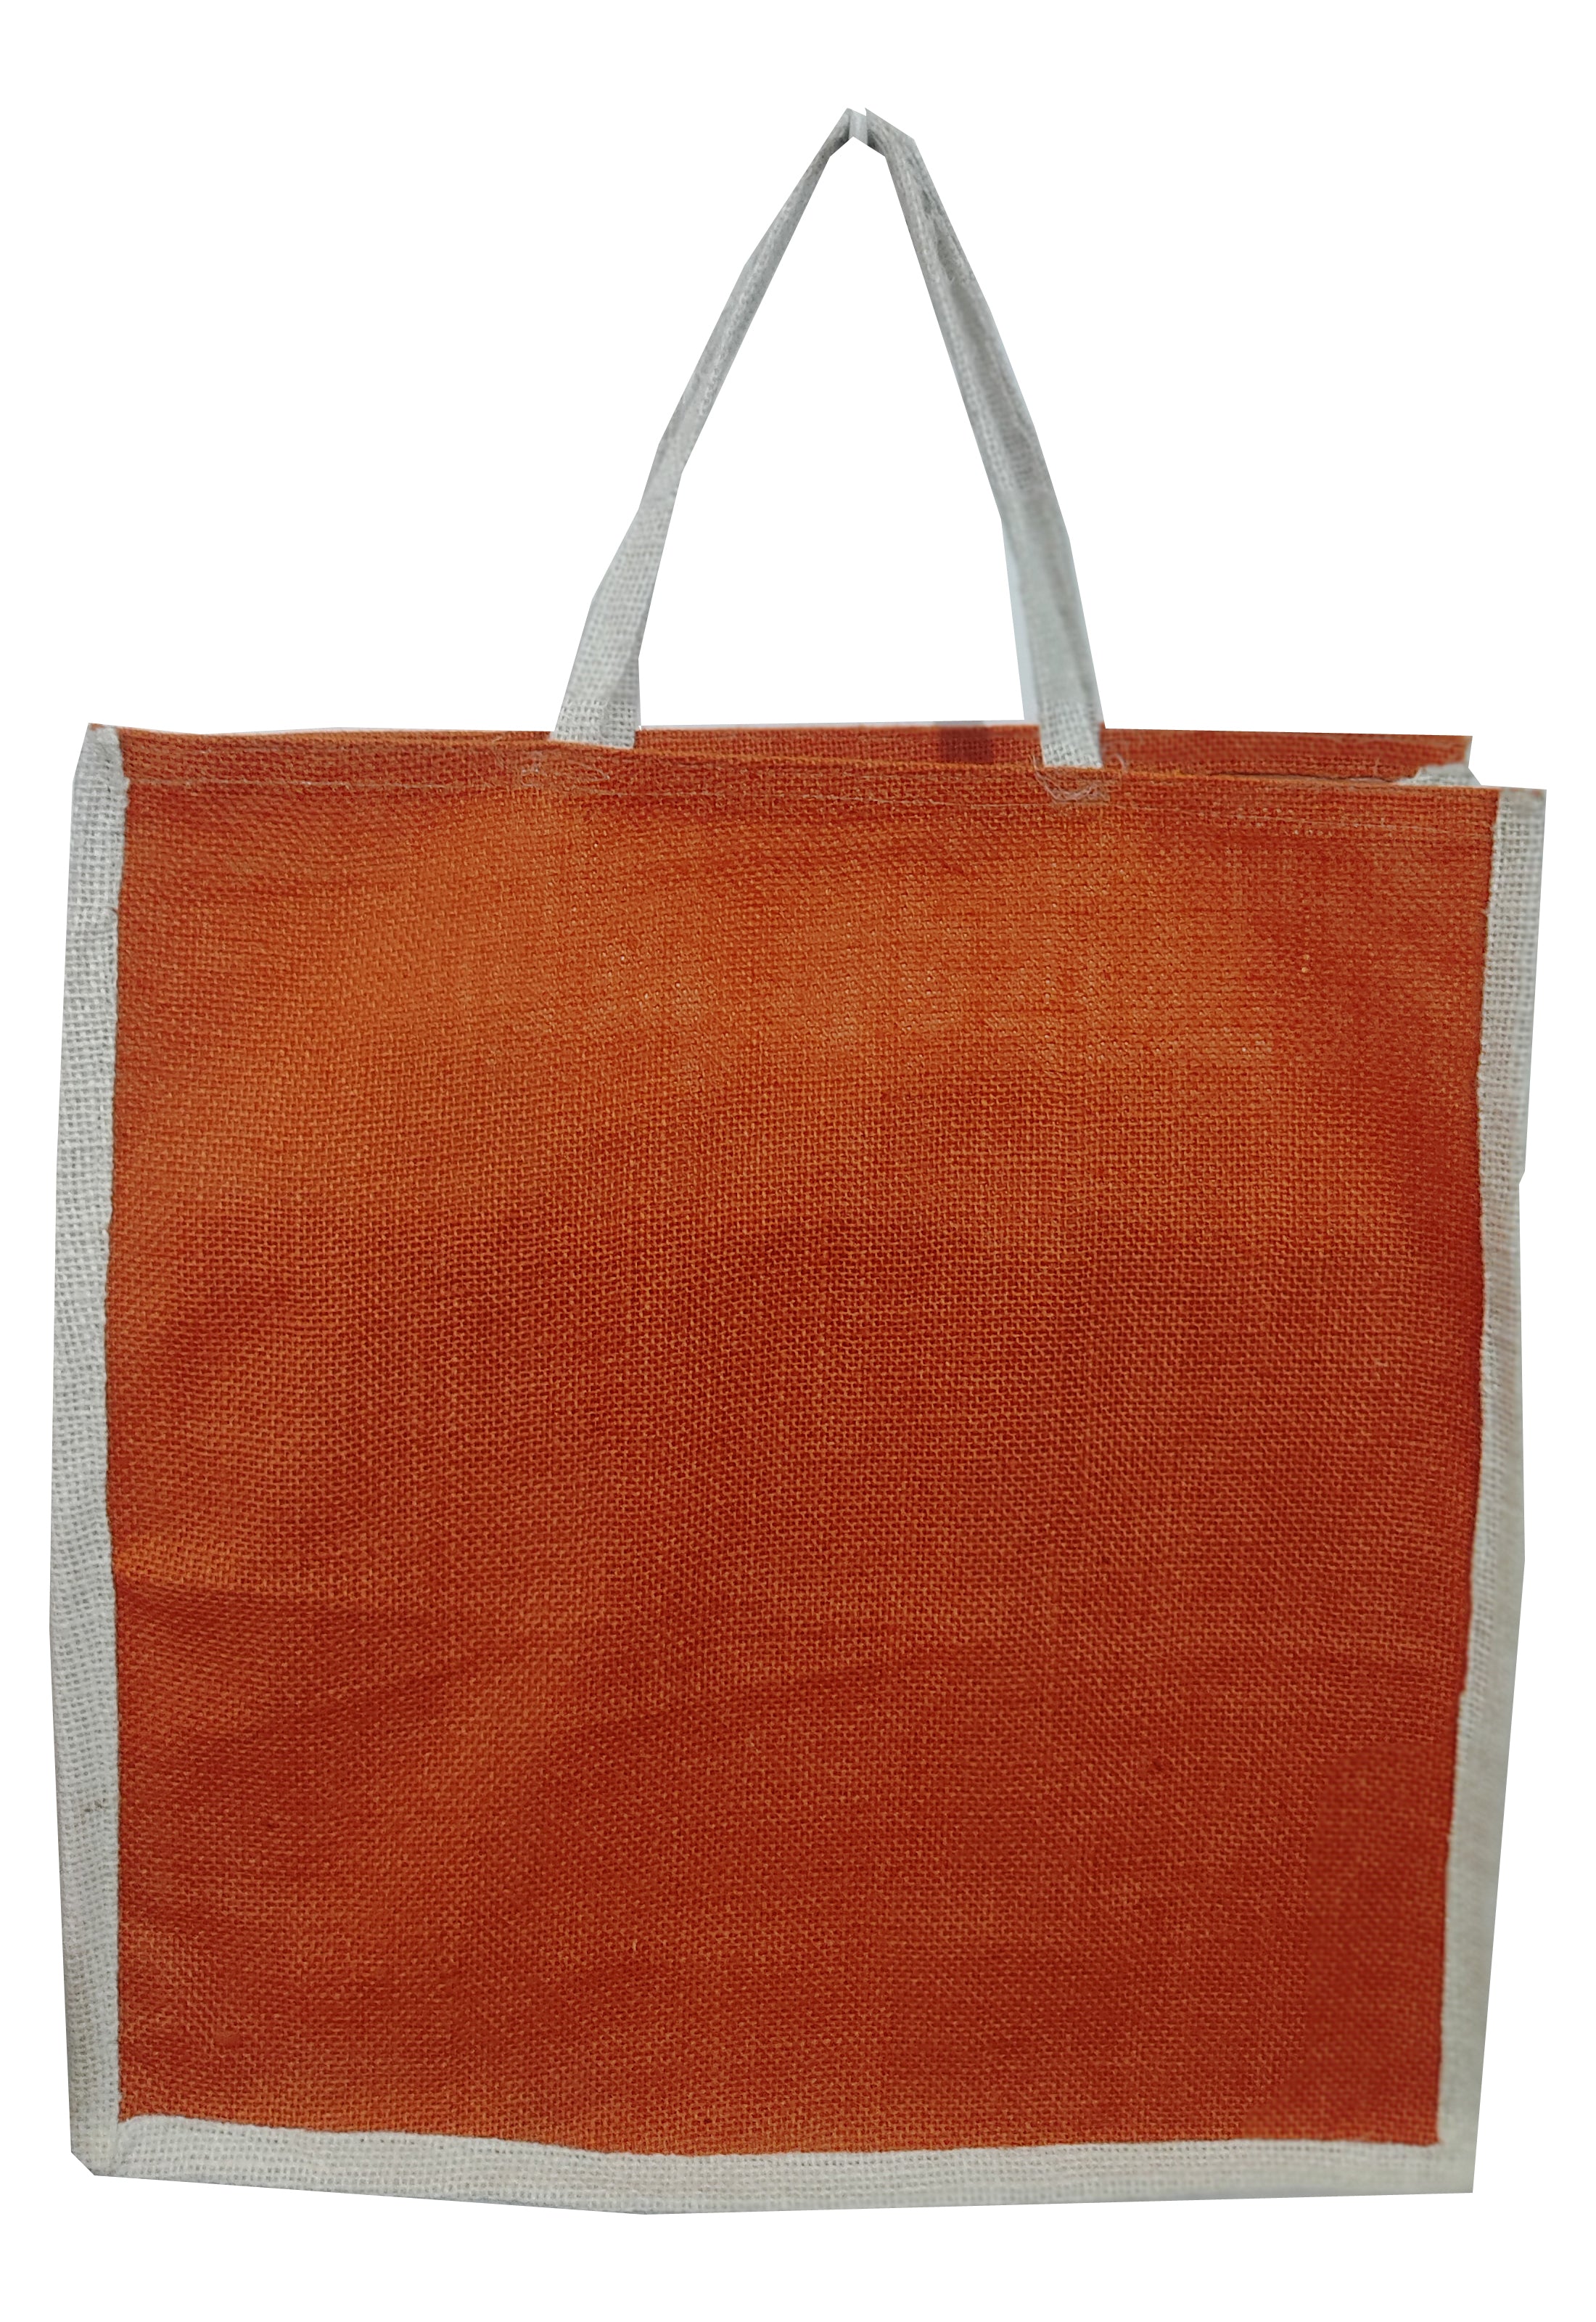 Plain Orange Paper Bags for Return Gifts | Pack of 10, Size 14x10.5x4 inch  by Apex | Perfect for Birthdays, Parties, Baby Shower, Wedding, Diwali,  Raksha Bandhan, and Celebrations : Amazon.in: Home